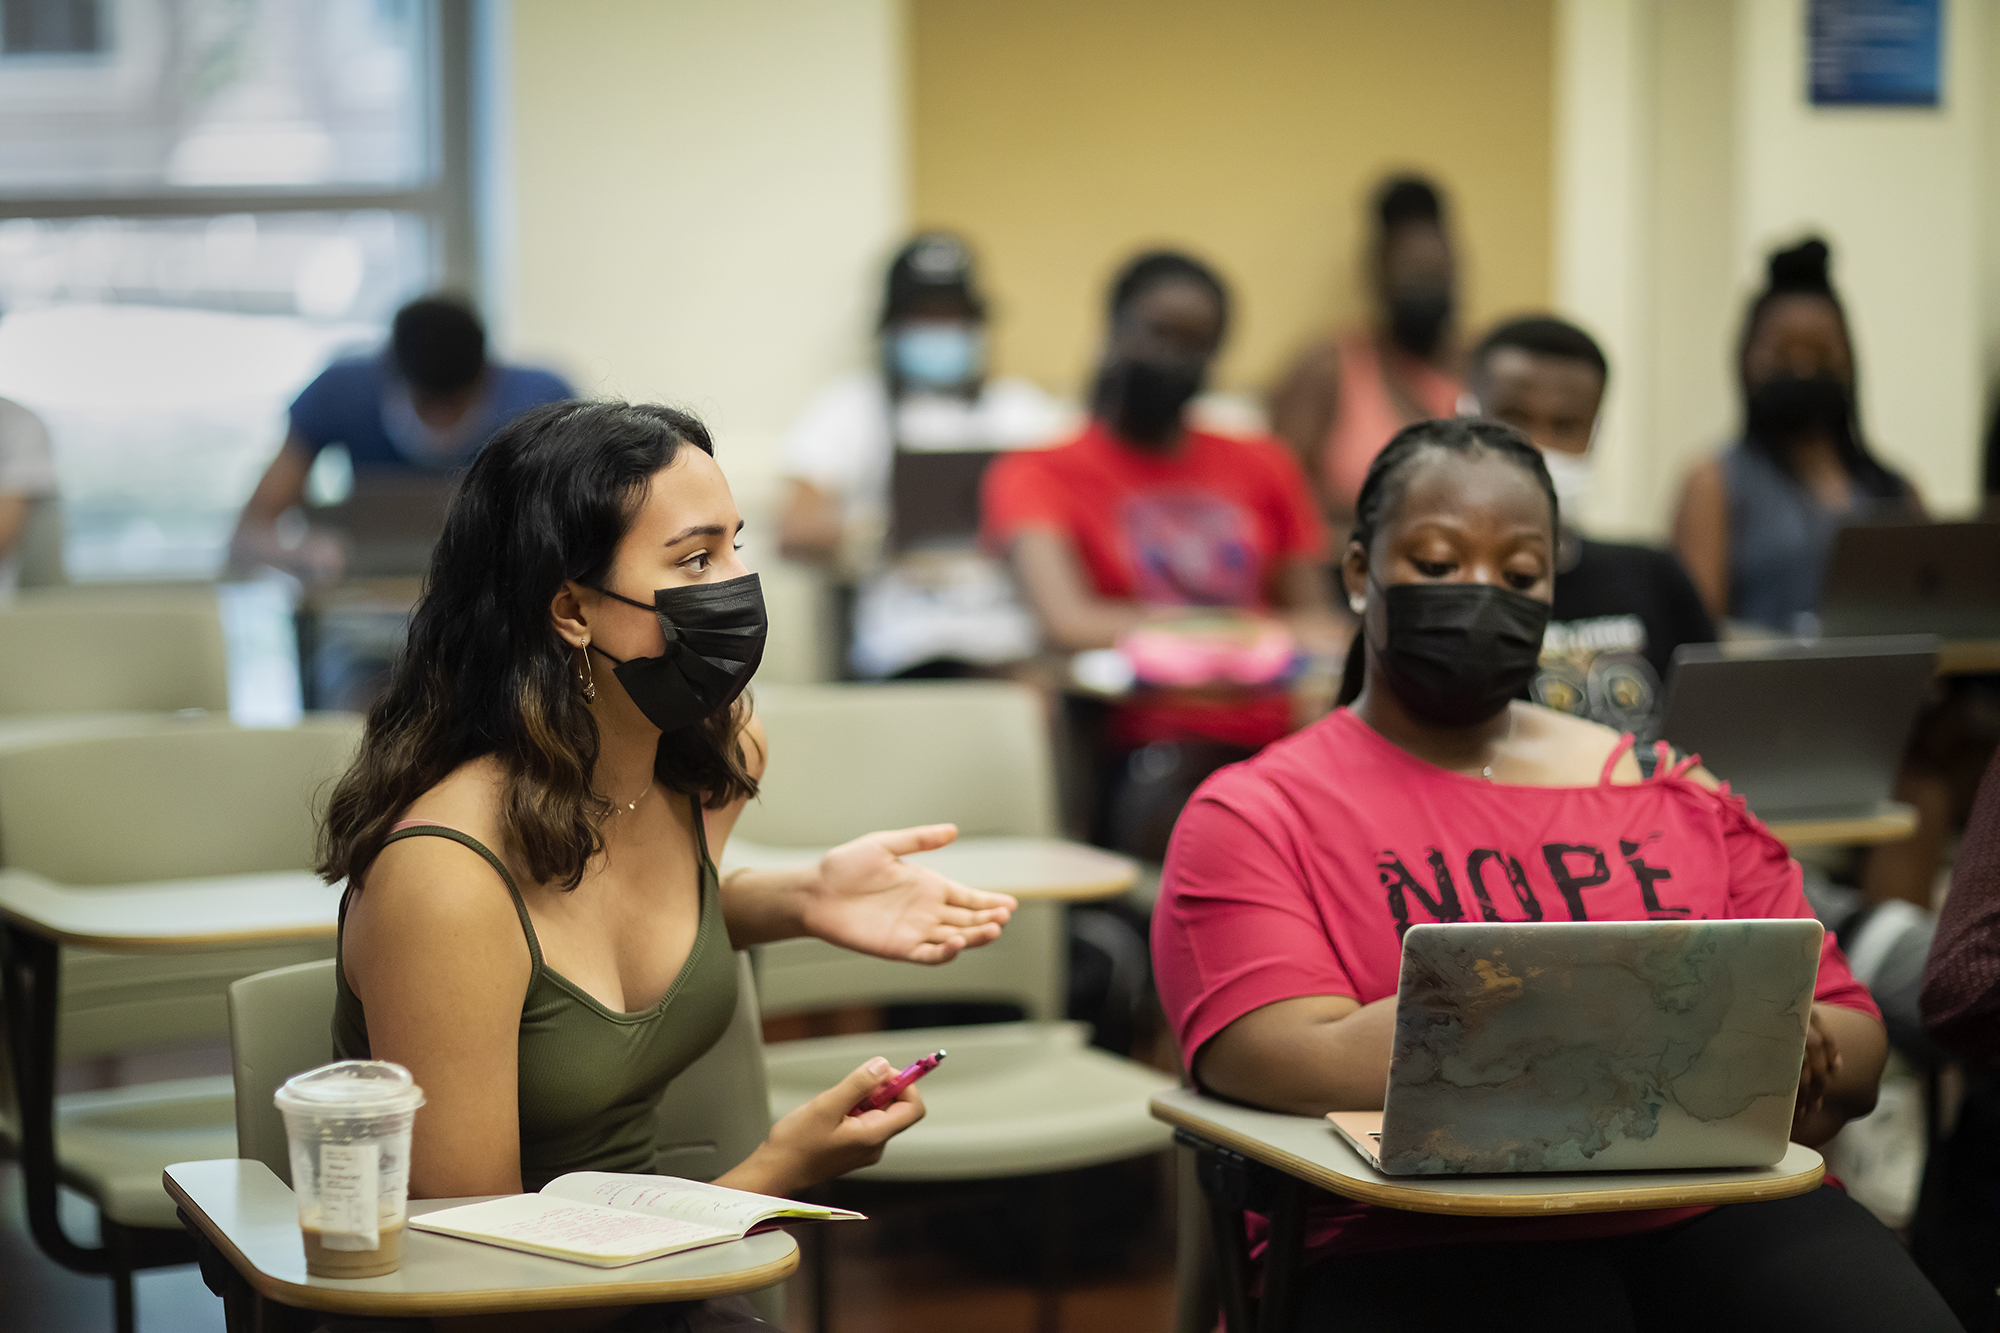 Two masked students sit in the front of a classroom, one with a laptop, the other speaking